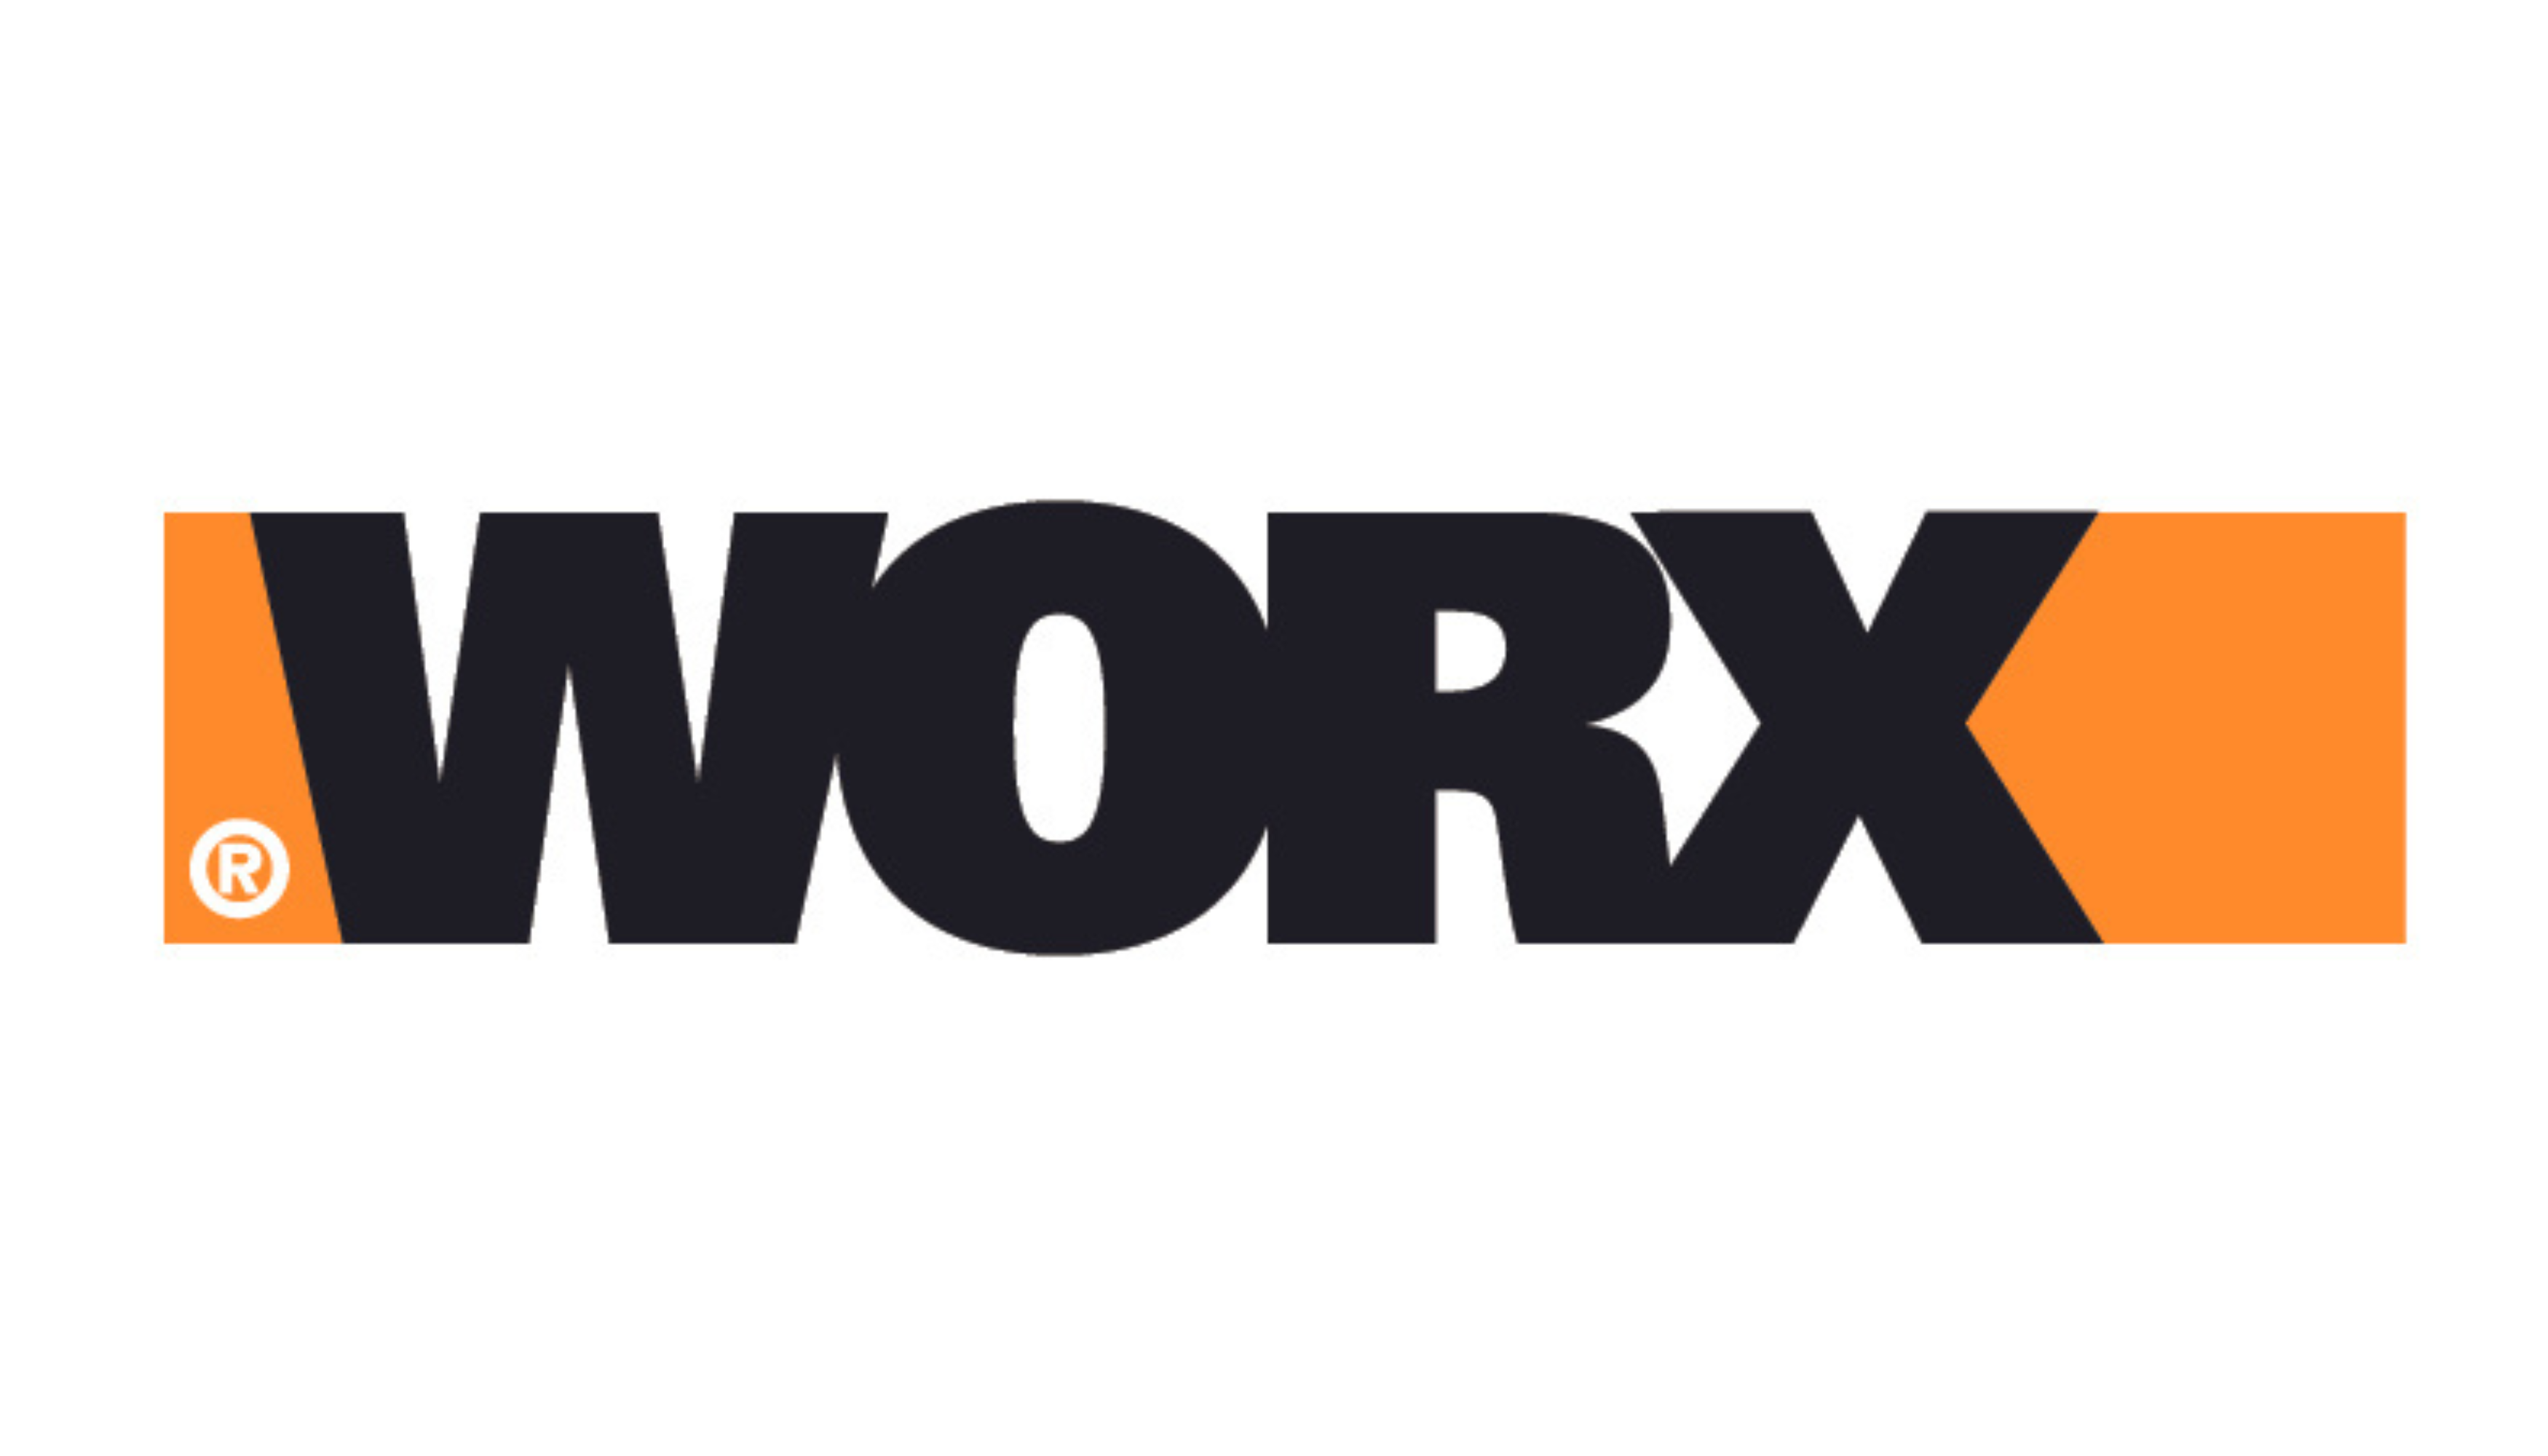 Worx: New Product Introduction